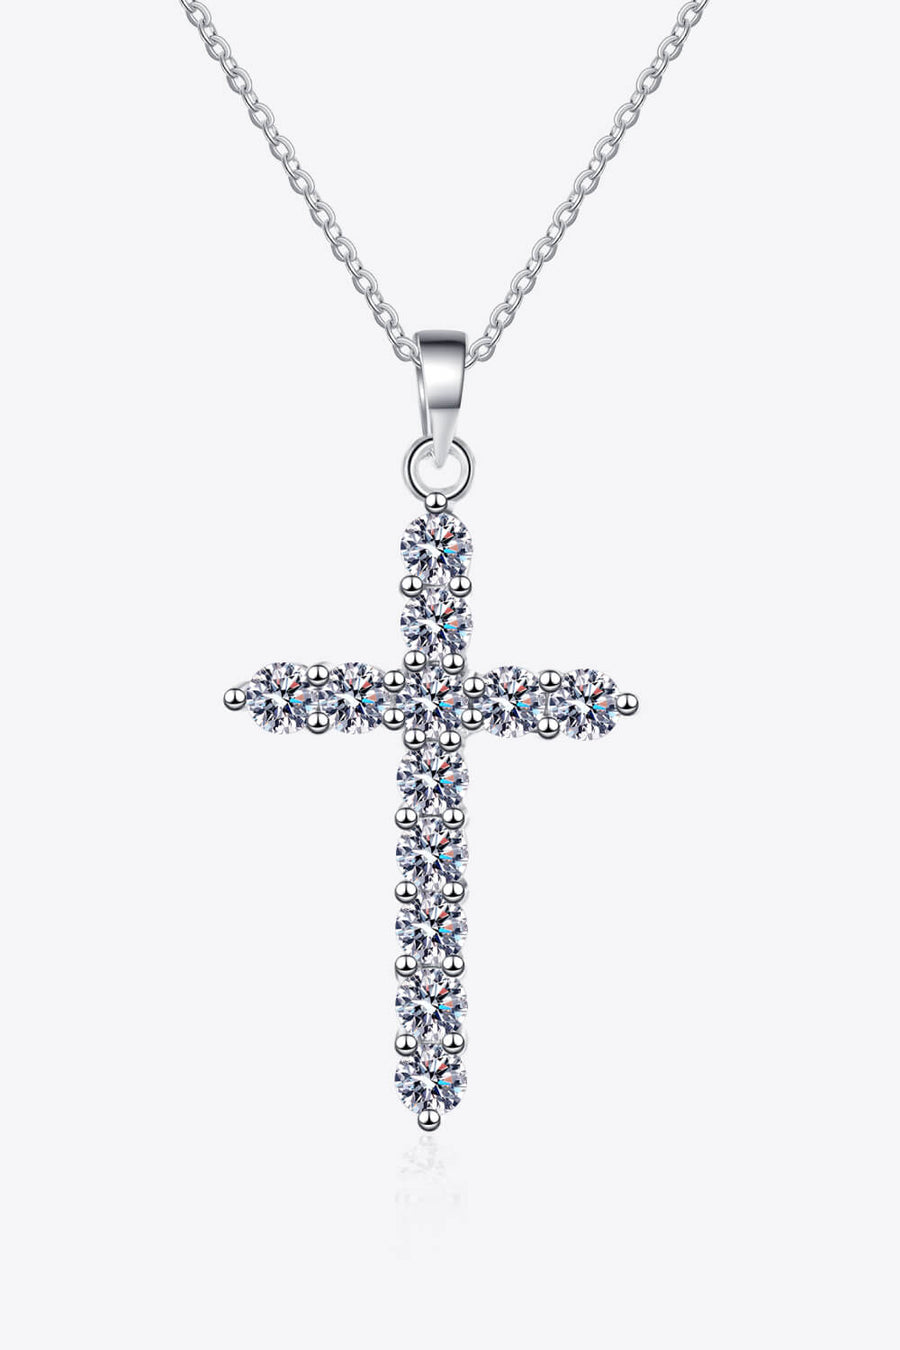 Sterling silver necklace, Cross pendant, Moissanite gemstone, Elegant jewelry, Religious necklace, Sparkling centerpiece, Fine silver accessory, High-quality craftsmanship, Timeless beauty, Meaningful necklace.